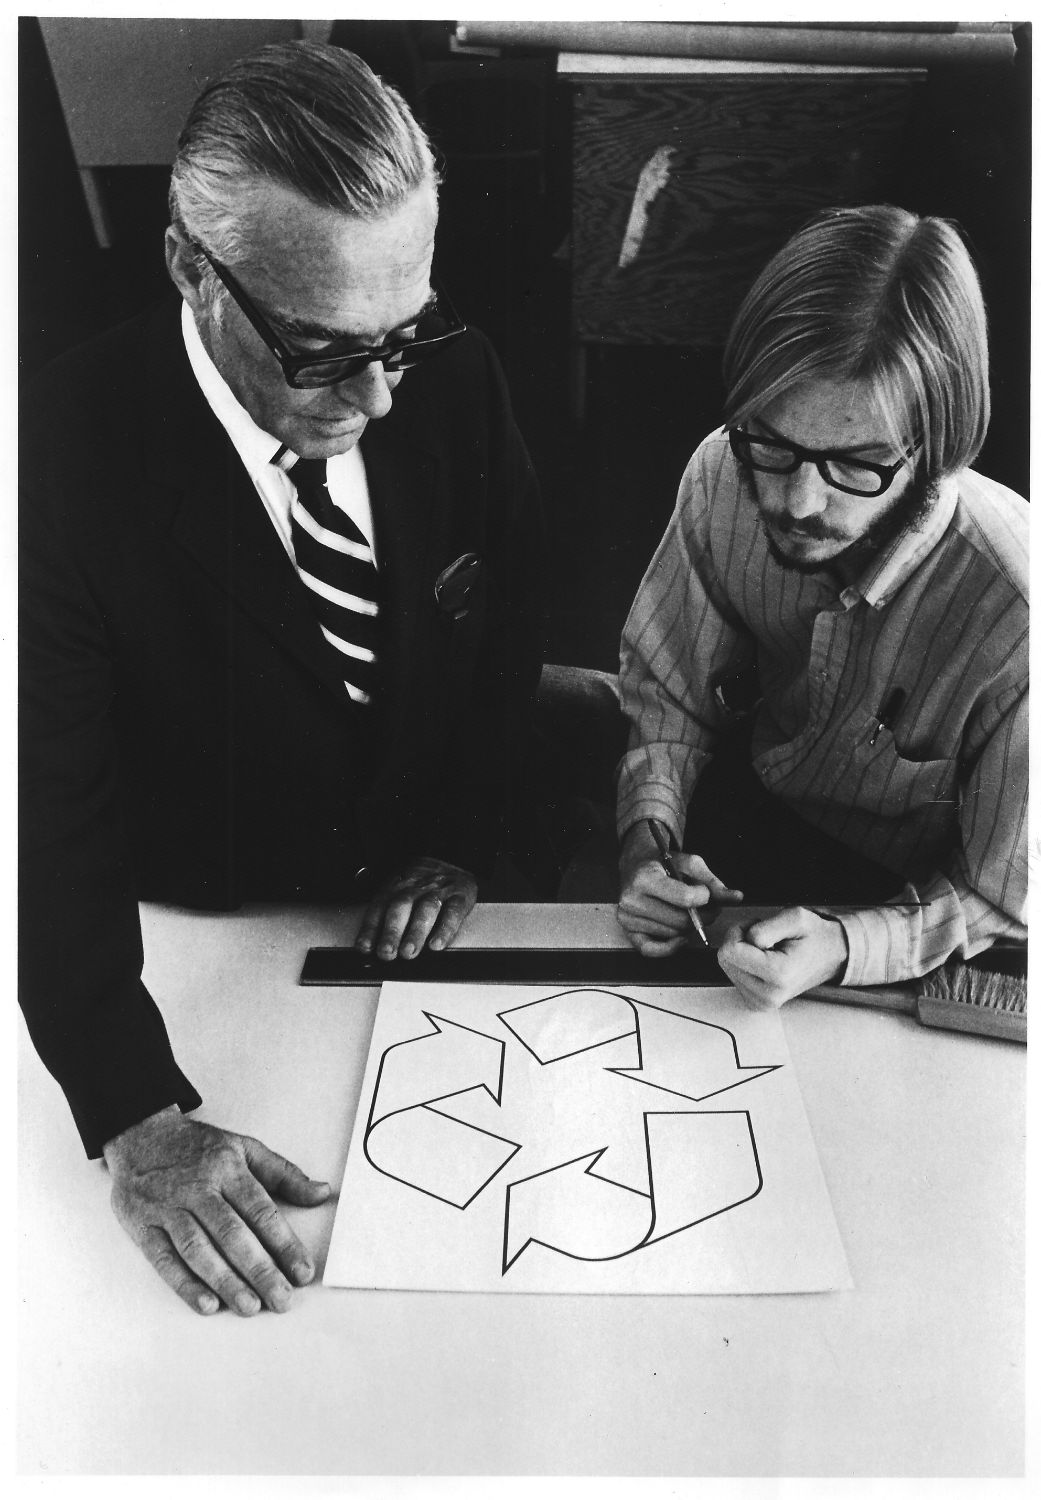 William Lloyd and Gary Anderson with the recycle symbol at the Container Corporation of America, 1971; photograph; 10 x 8 in.; collection of Gary D. Anderson.